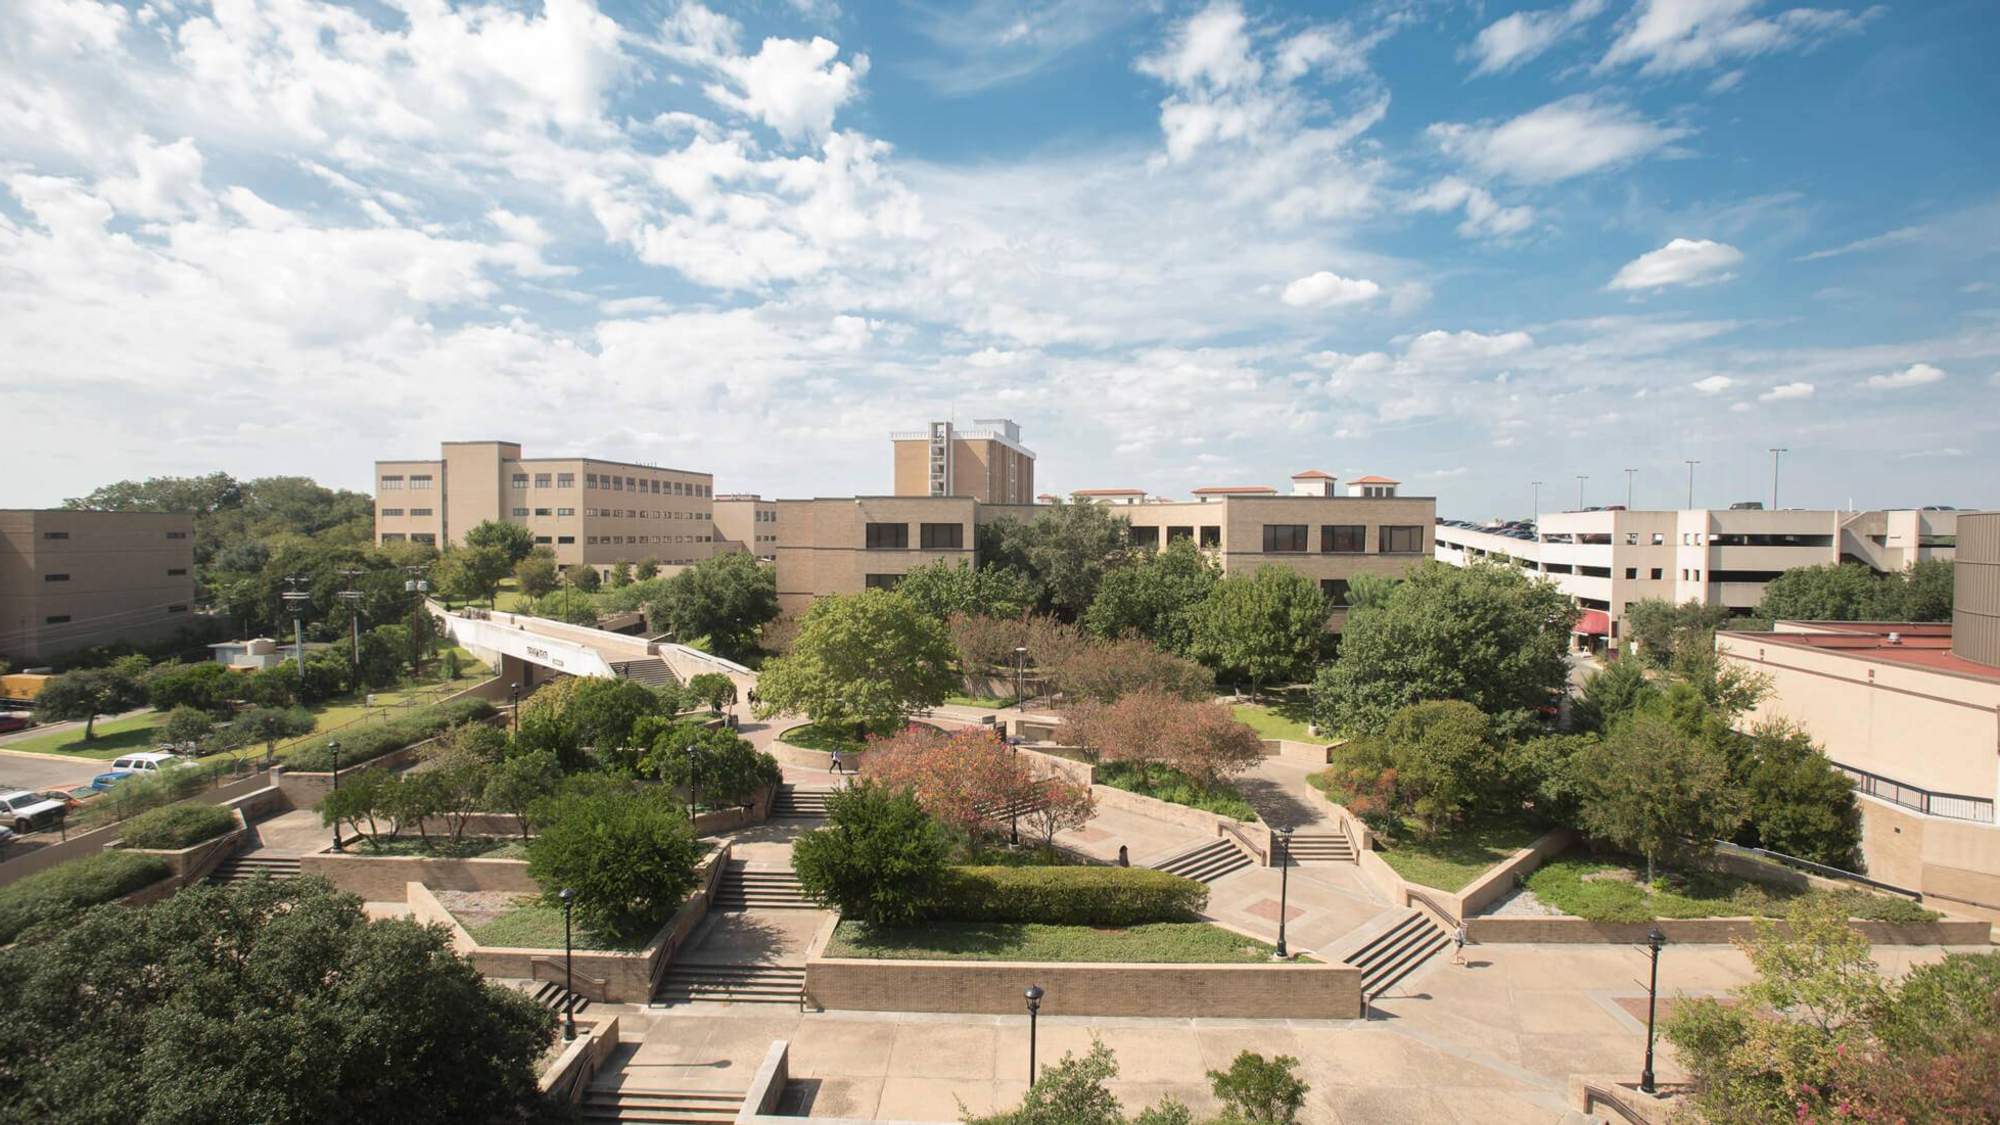 Wideshot view of Texas State Univiersty. Sky is blue with clouds. 